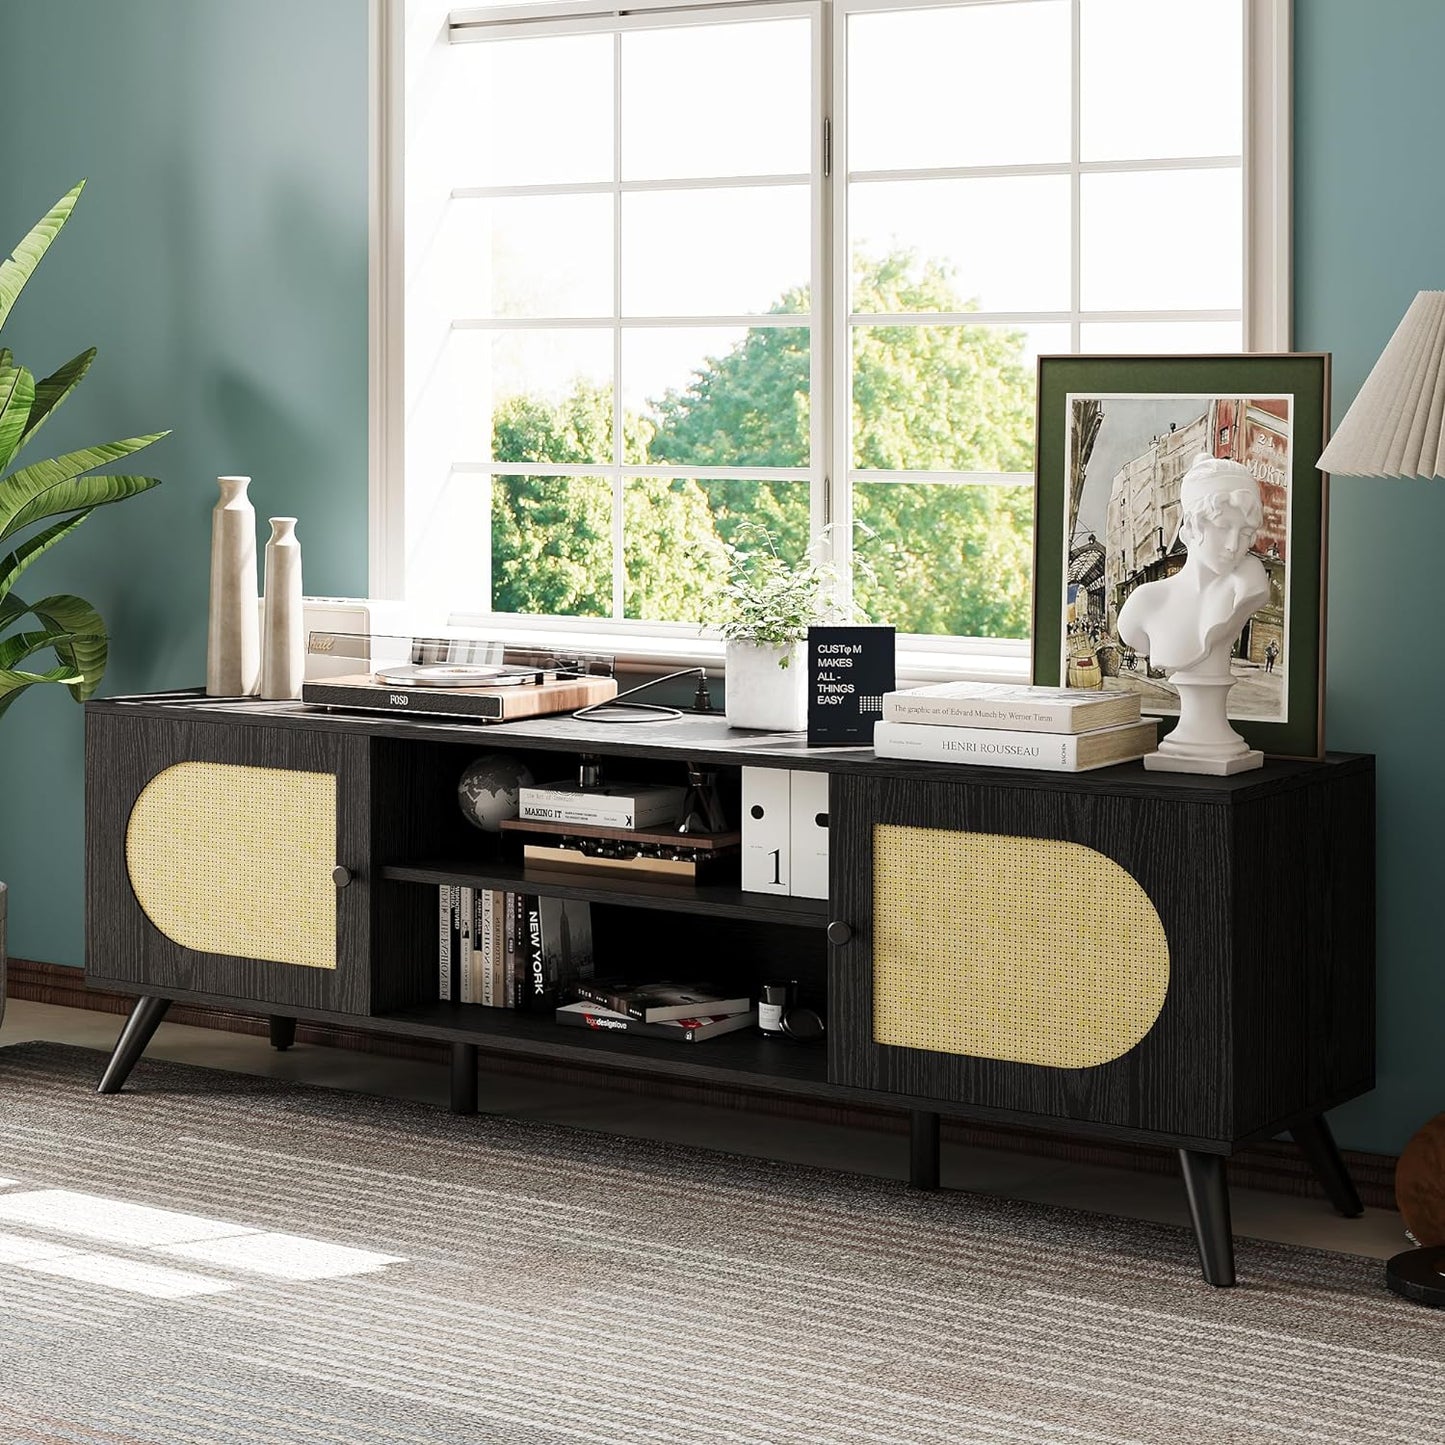 Boho TV Stands with Storage Cabinet Black